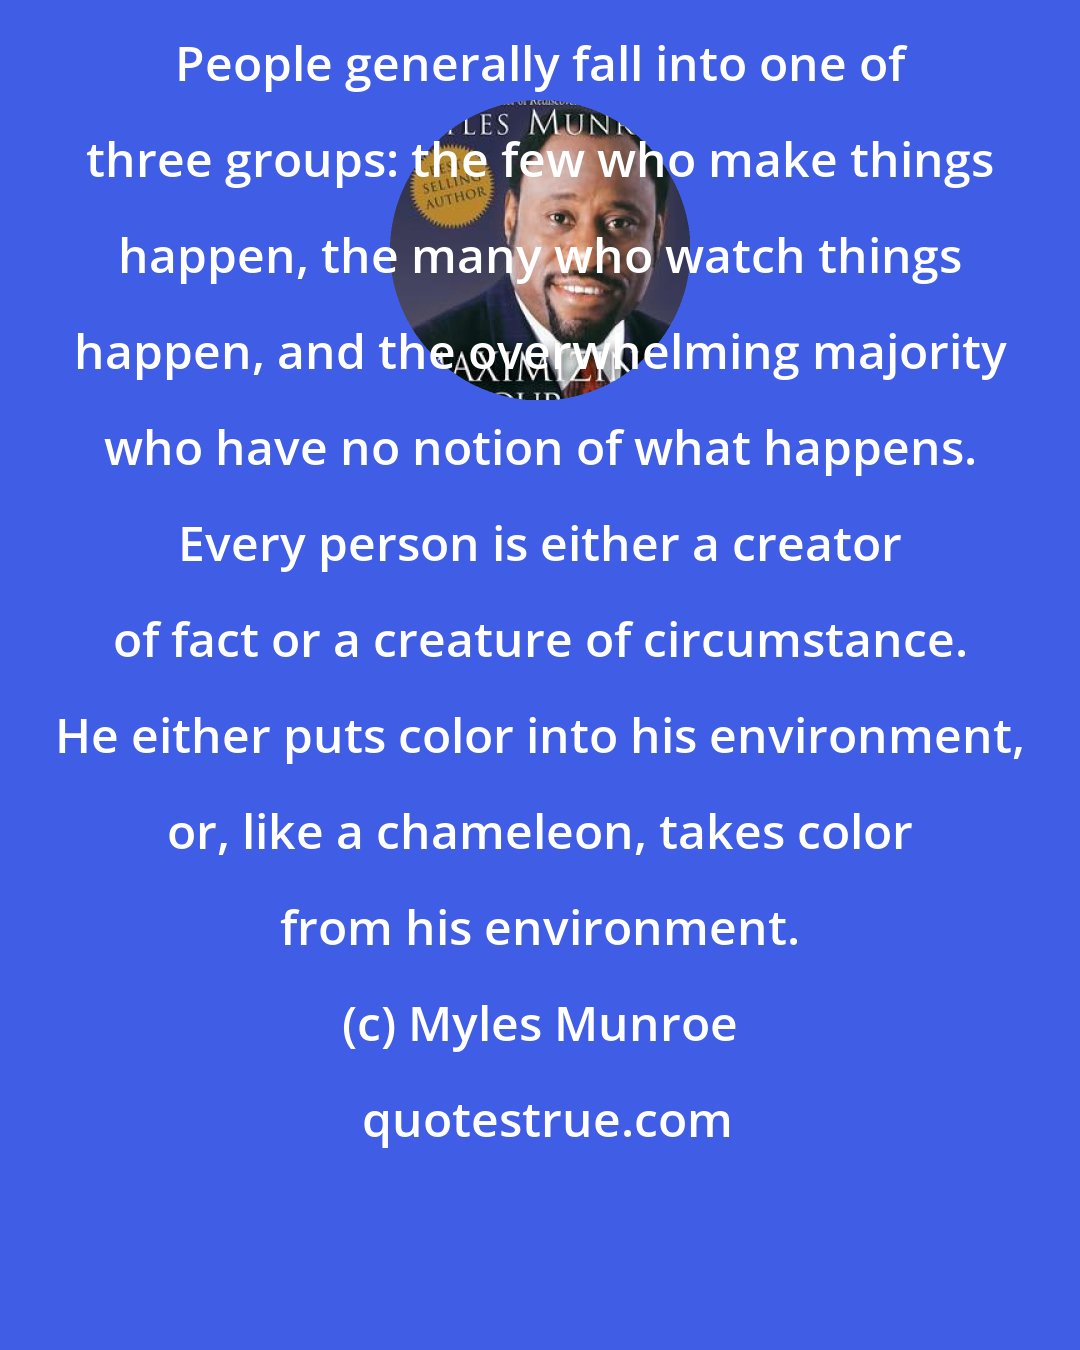 Myles Munroe: People generally fall into one of three groups: the few who make things happen, the many who watch things happen, and the overwhelming majority who have no notion of what happens. Every person is either a creator of fact or a creature of circumstance. He either puts color into his environment, or, like a chameleon, takes color from his environment.